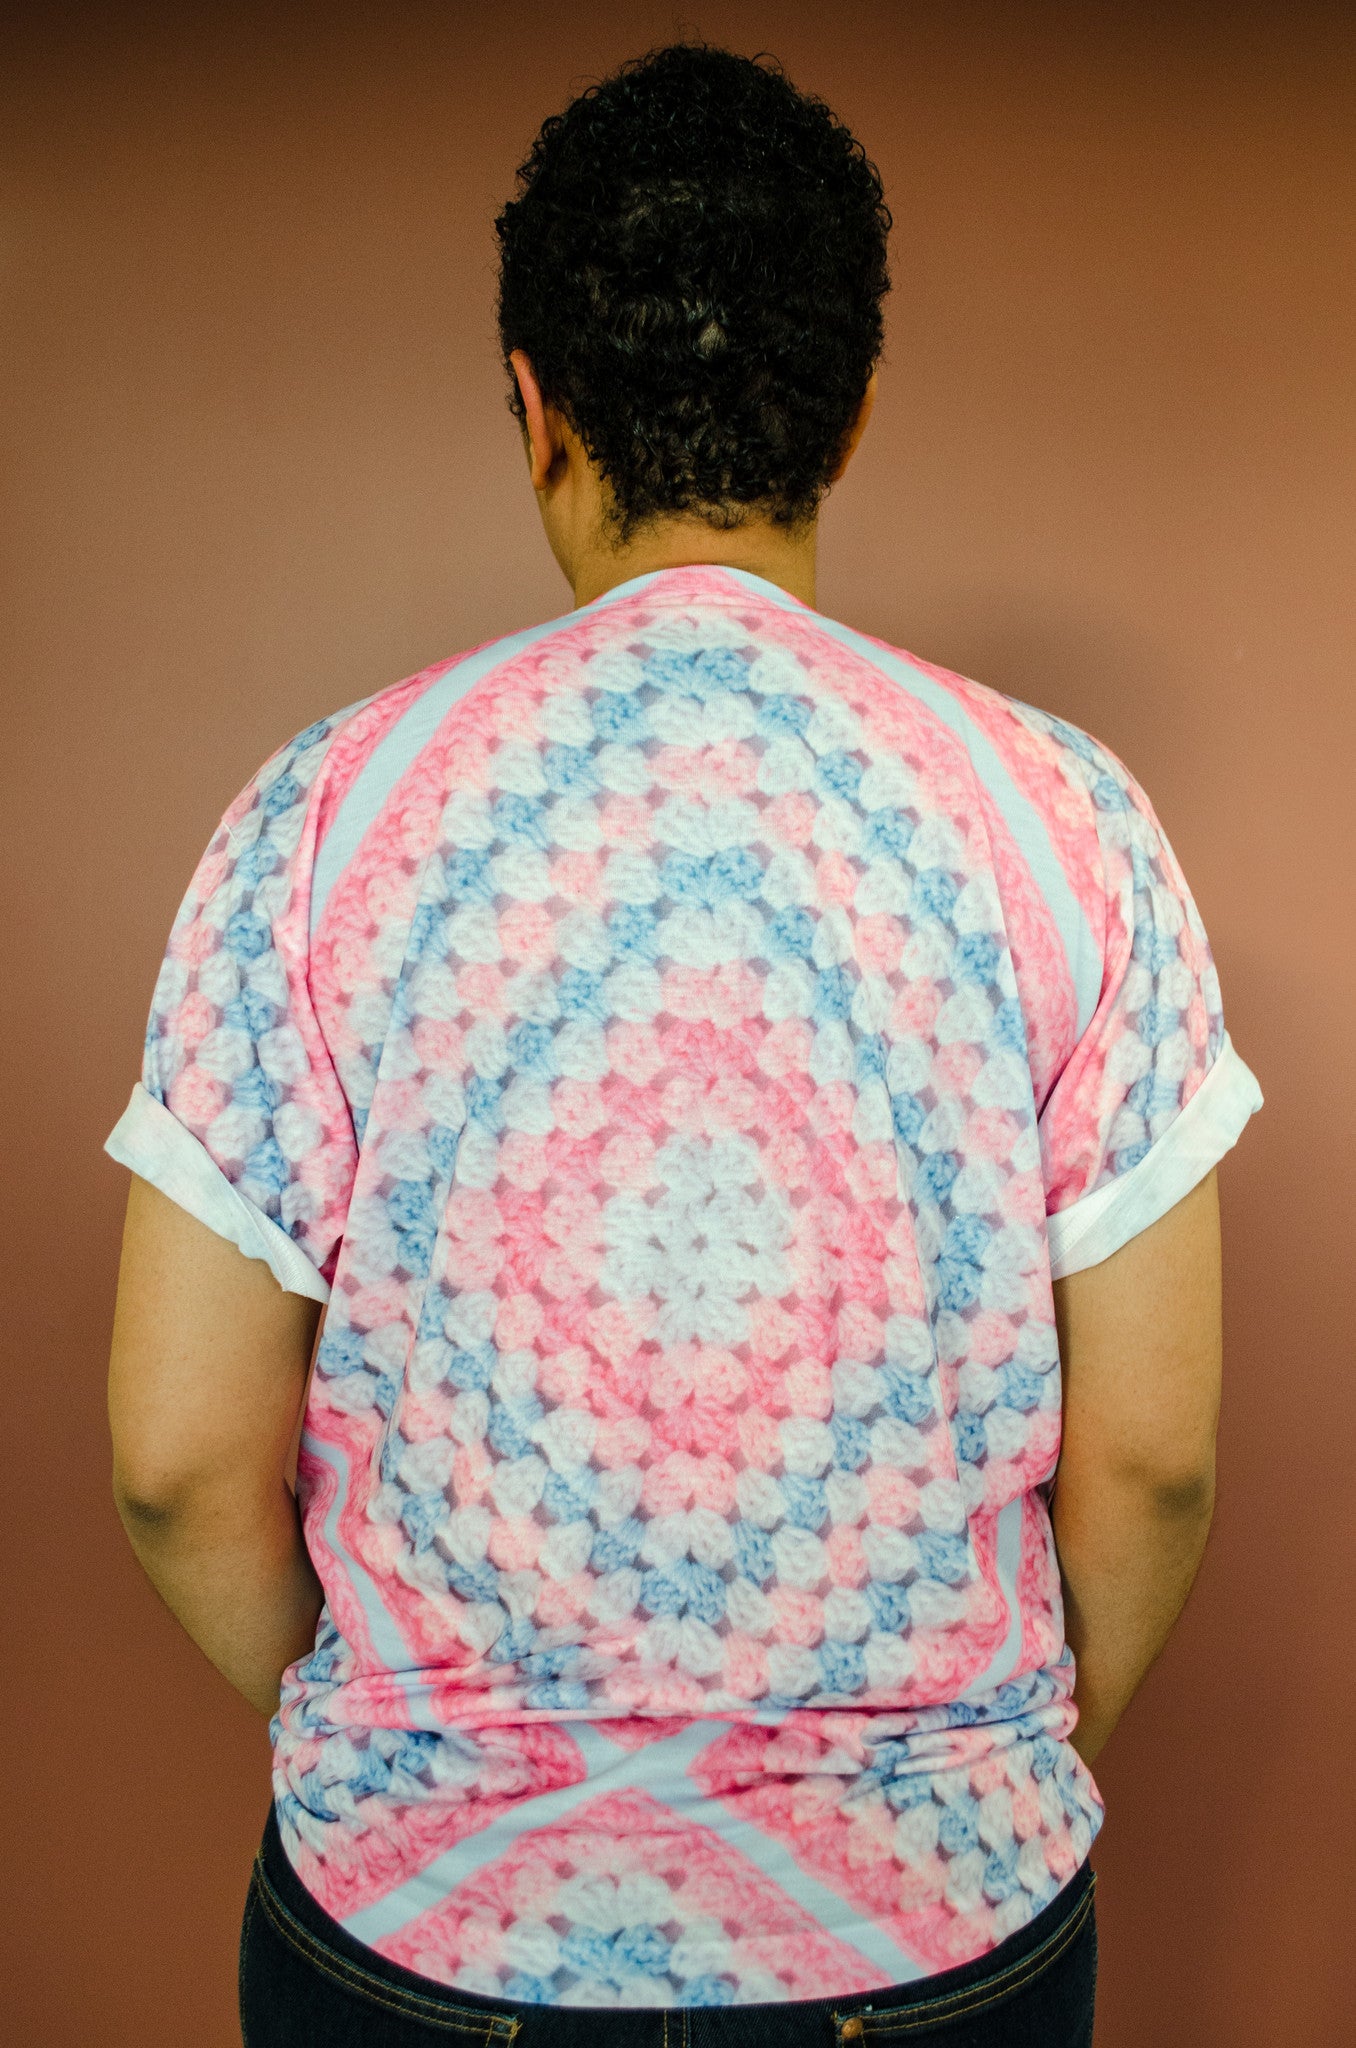 Snapdragon Brand Clothing Granny Square Crochet Print pink and blue t-shirt in style Cotton Candy features a Melanie Martinez boho feel and a pastel rainbow of colors. Made of comfortable polyester.